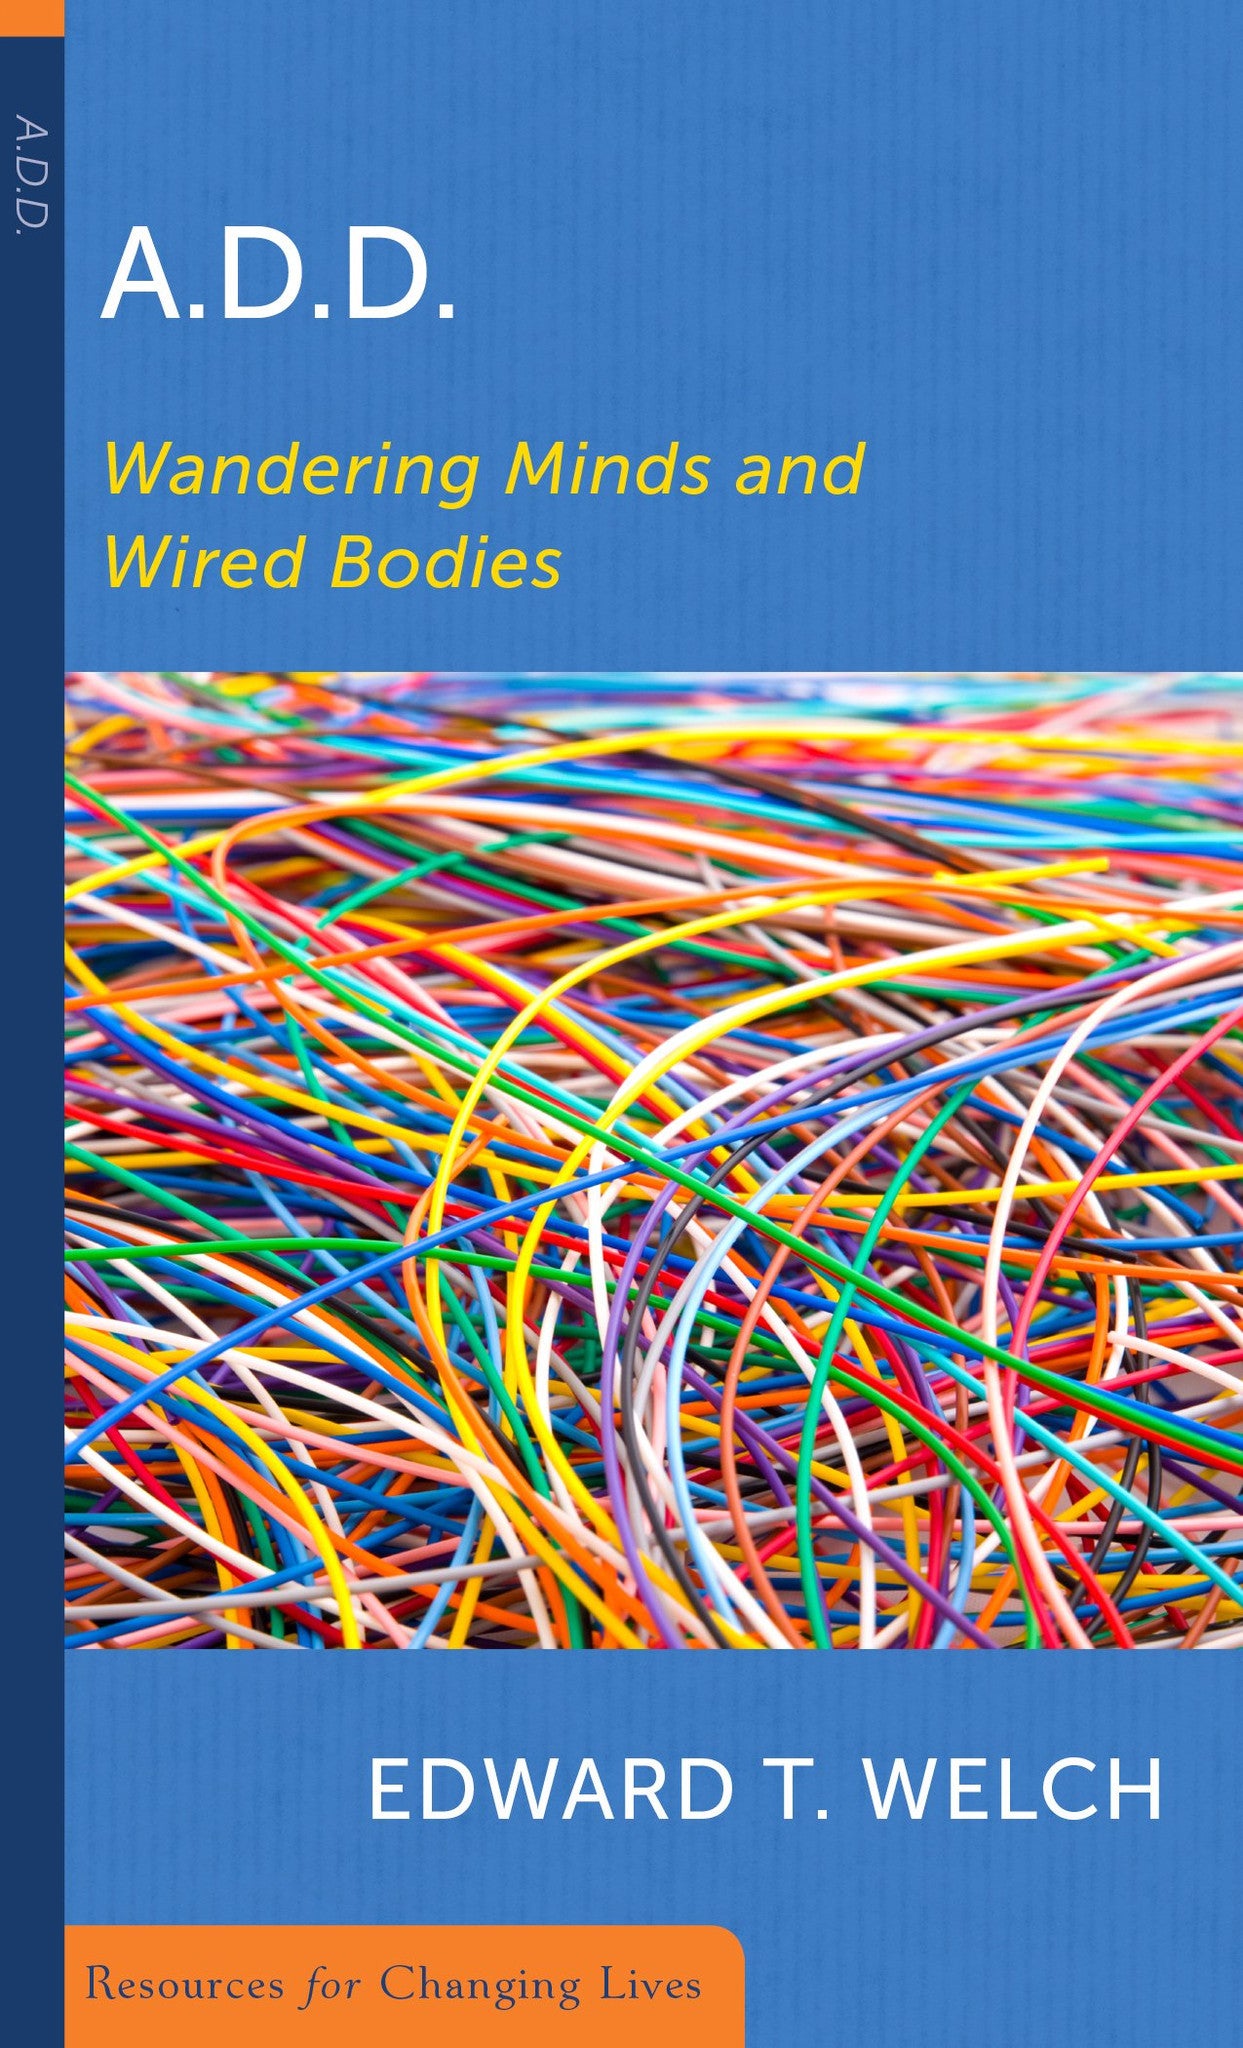 ADD: Wandering Minds and Wired Bodies by Edward T. Welch - Mini Book